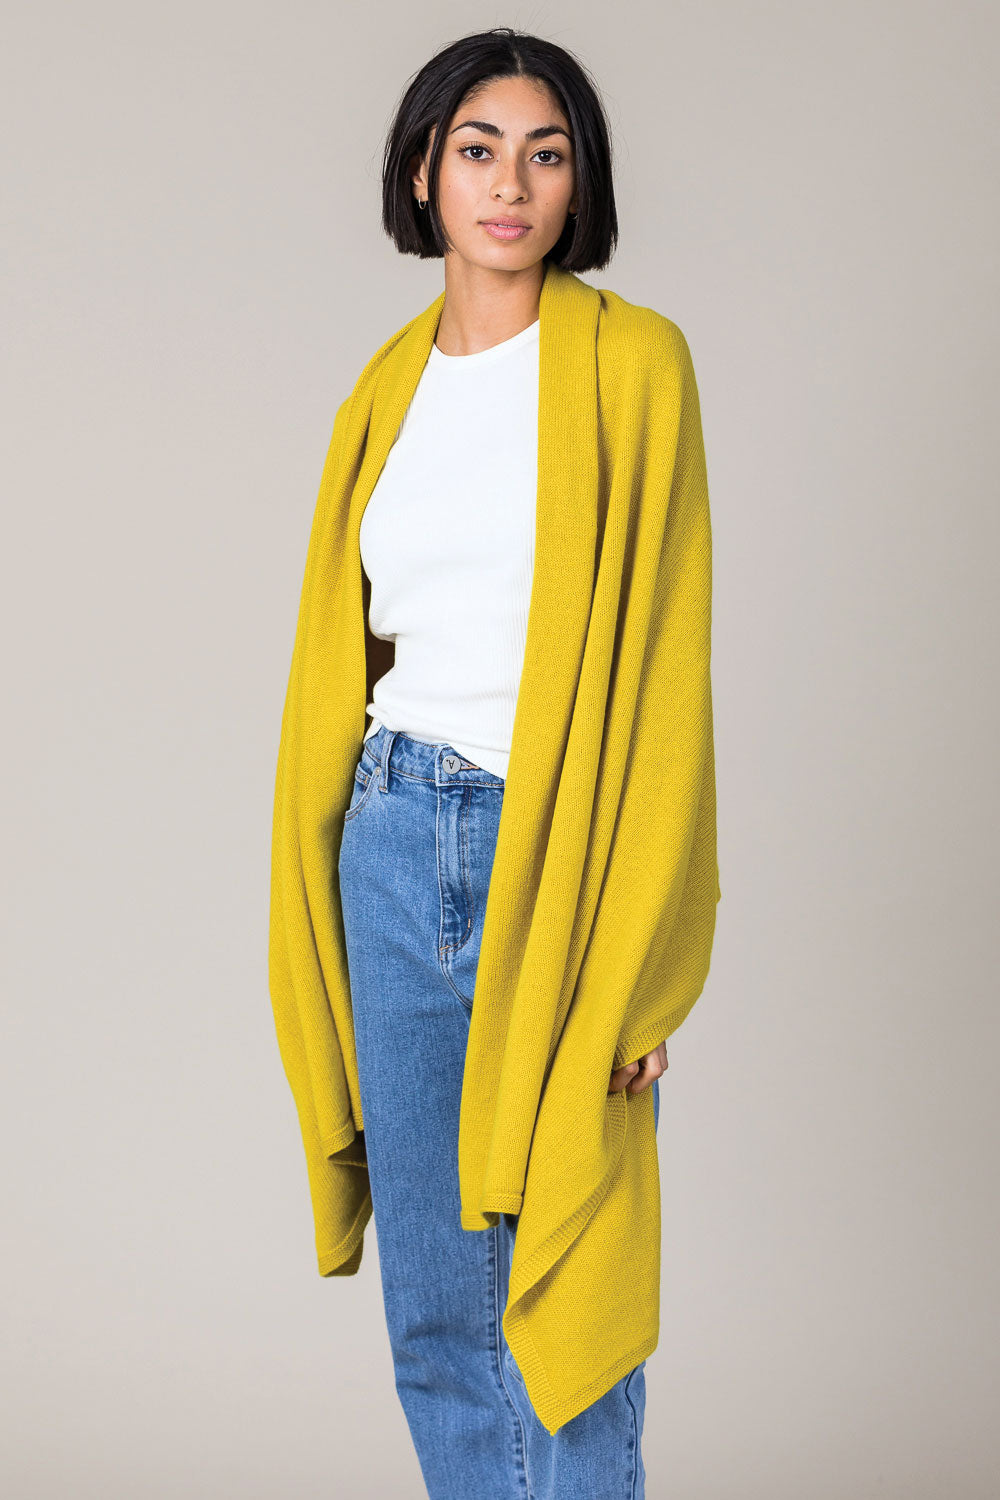 Cashmere Travel Wrap in Turmeric Yellow